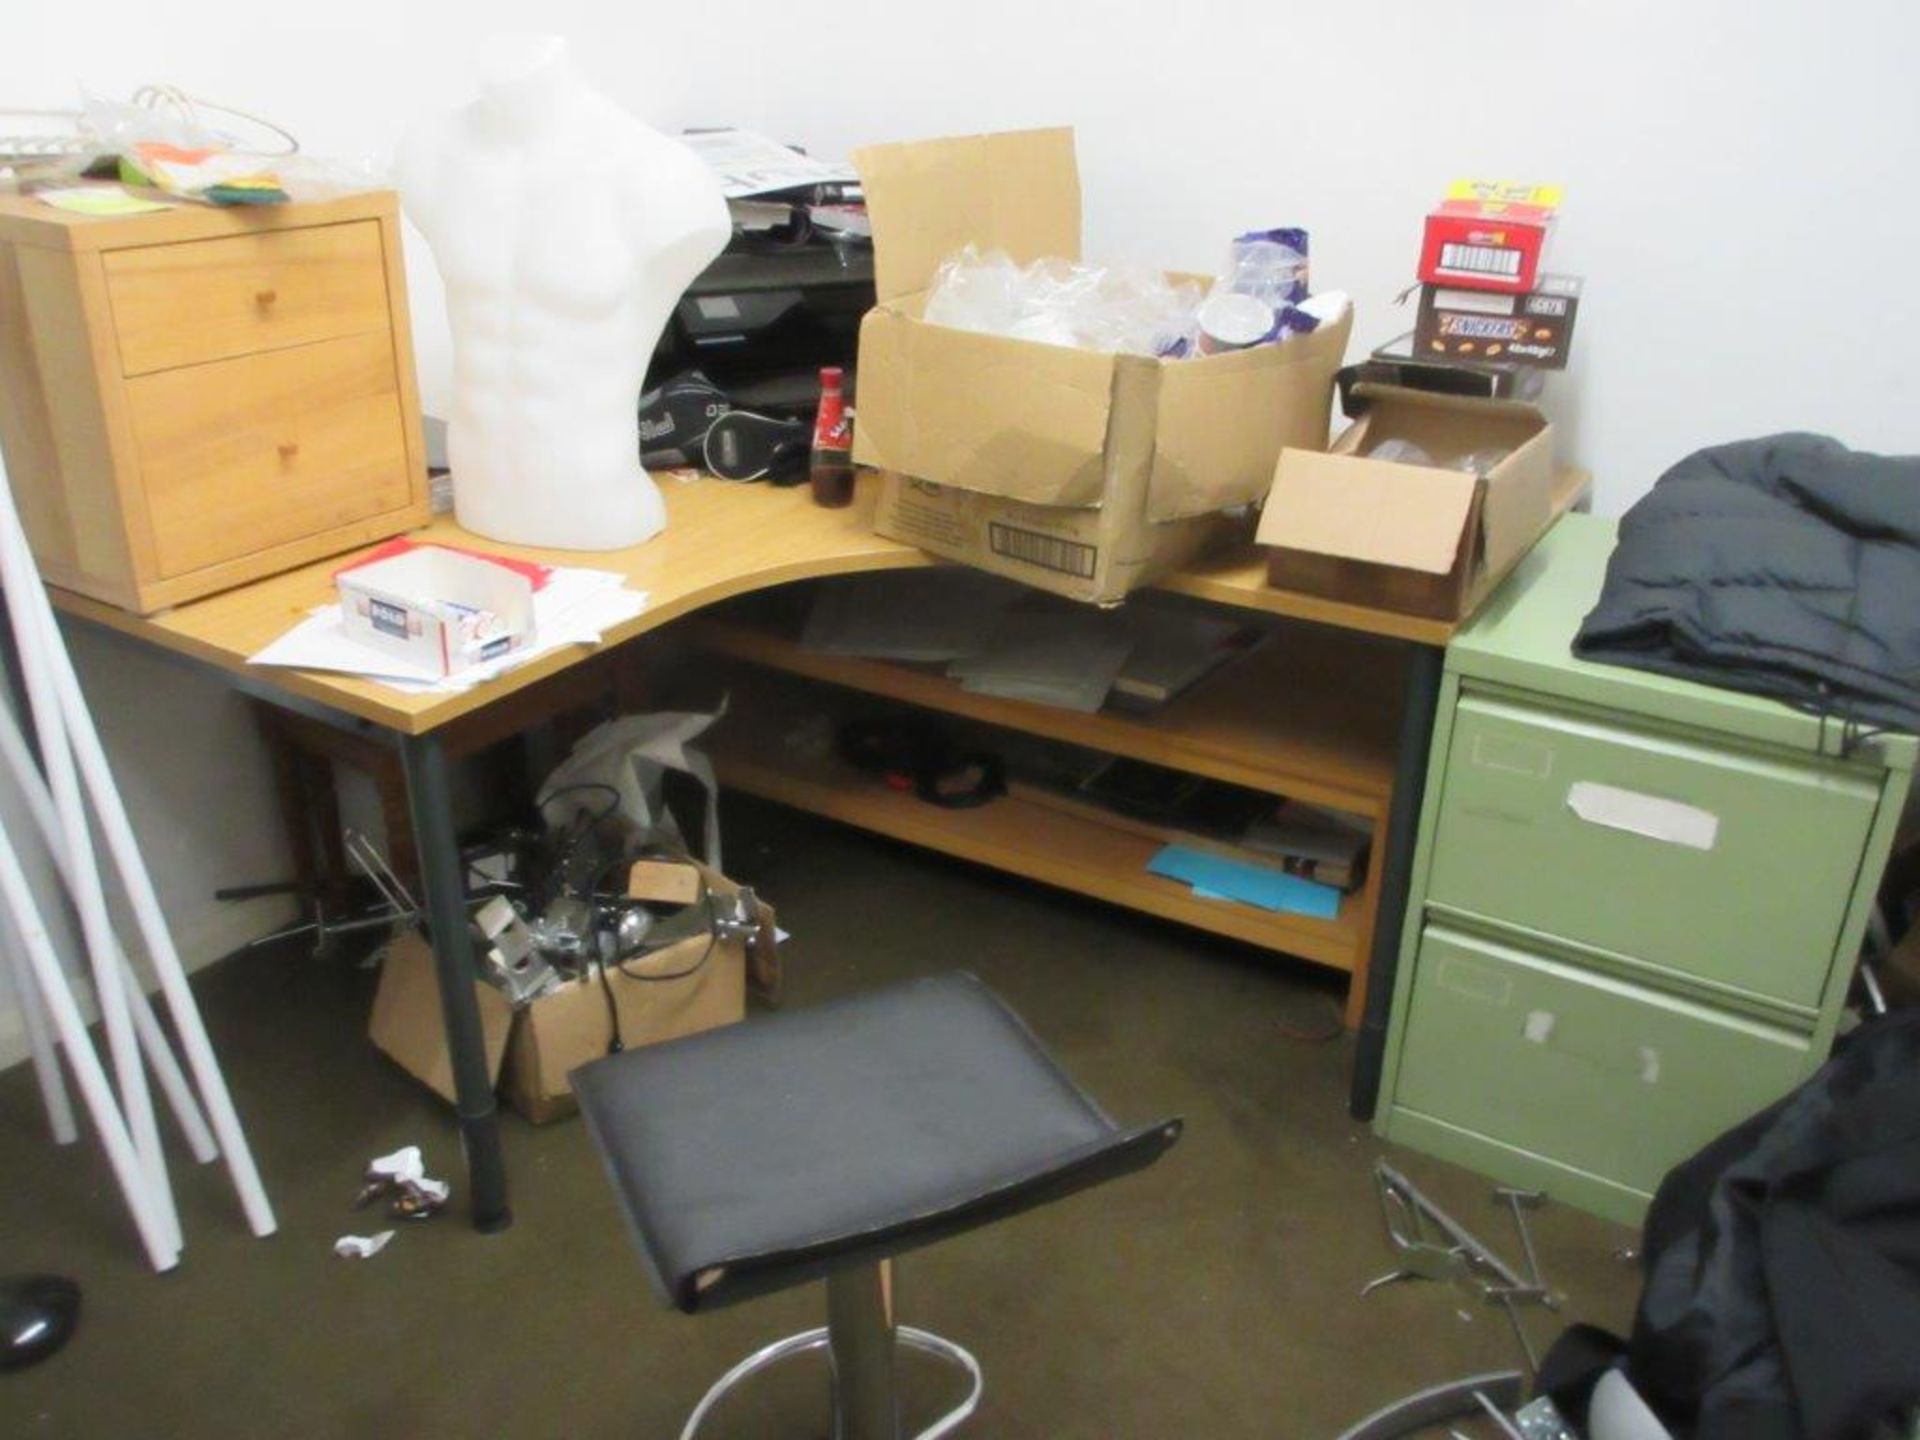 The remaining contents of Pro Shop to include pigeon hole storage unit, 2 easy chairs, side table, - Image 4 of 6